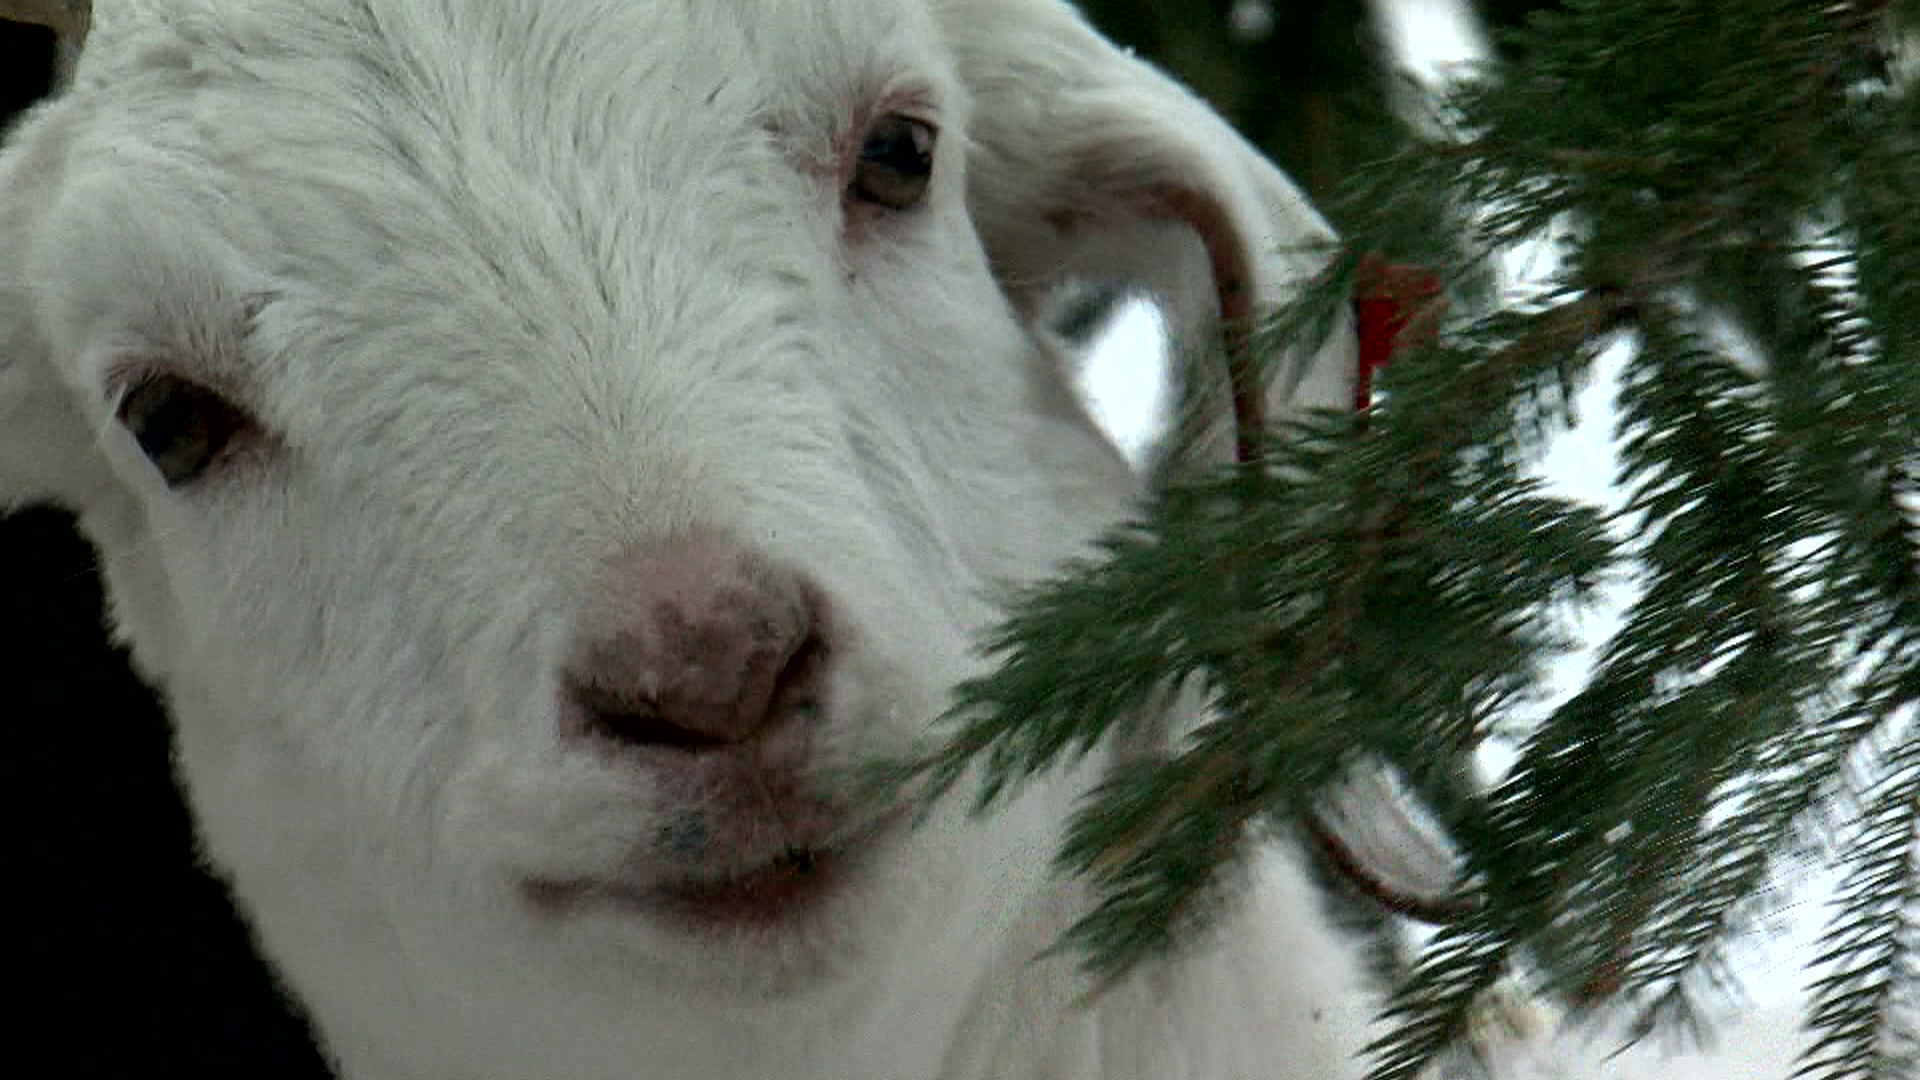 These Goats Will Happily Eat Your Old Christmas Tree